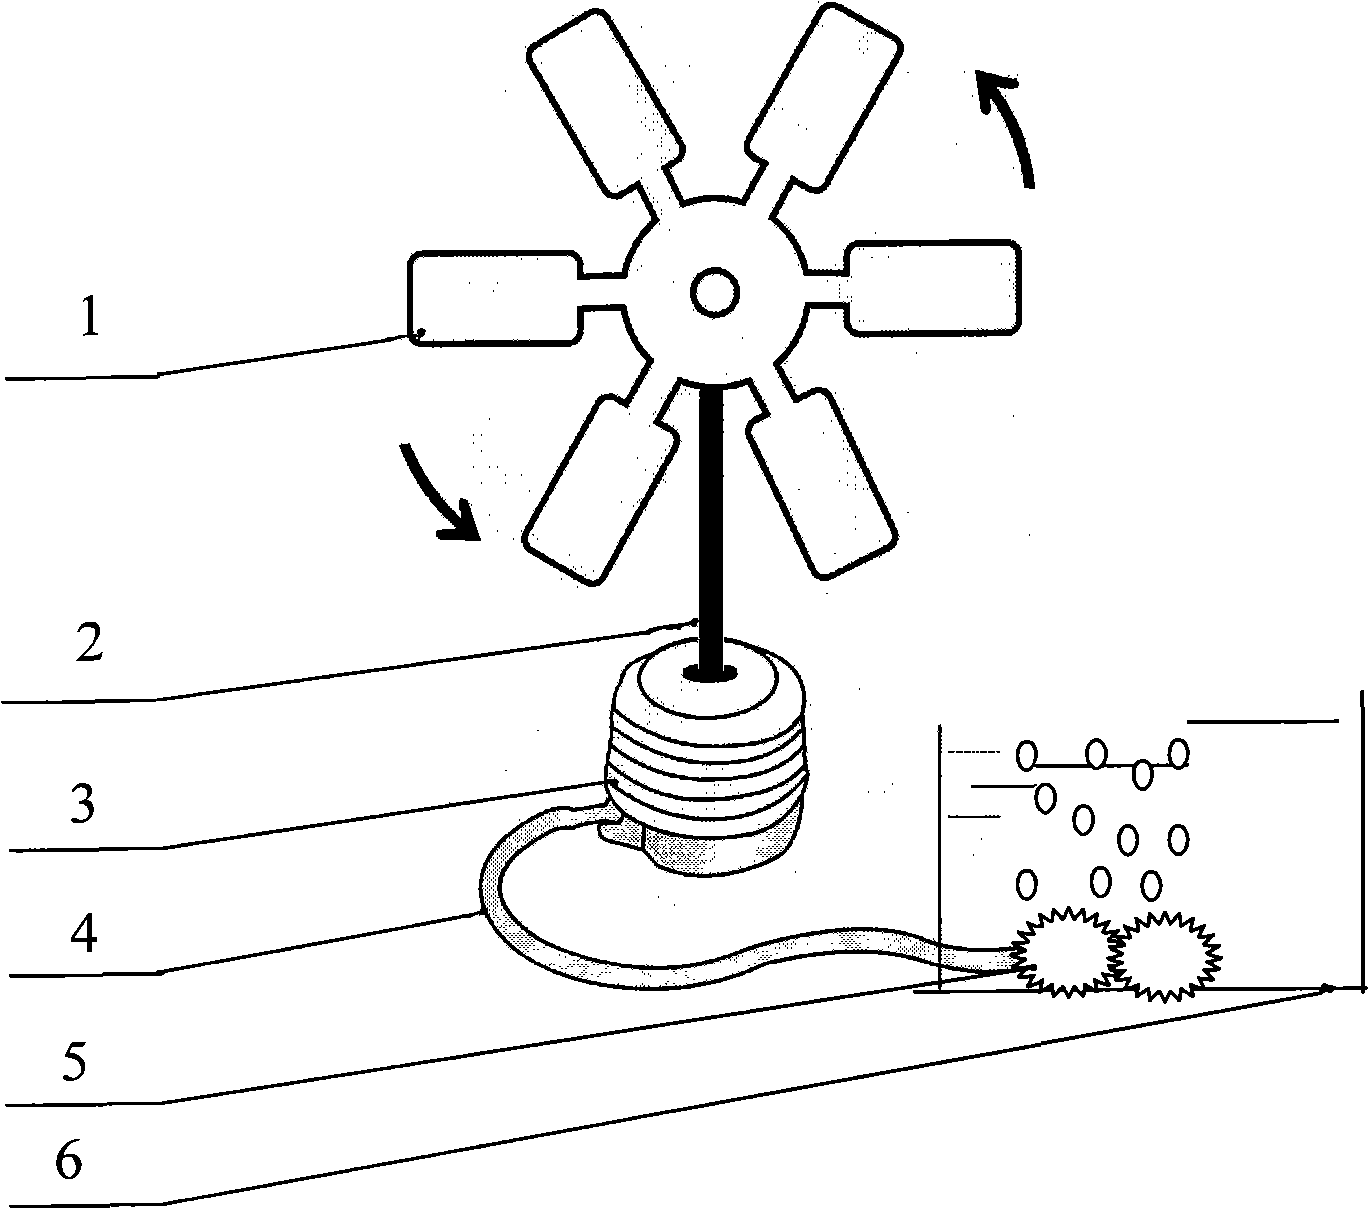 Device and method for automatic wind-power sewage aeration